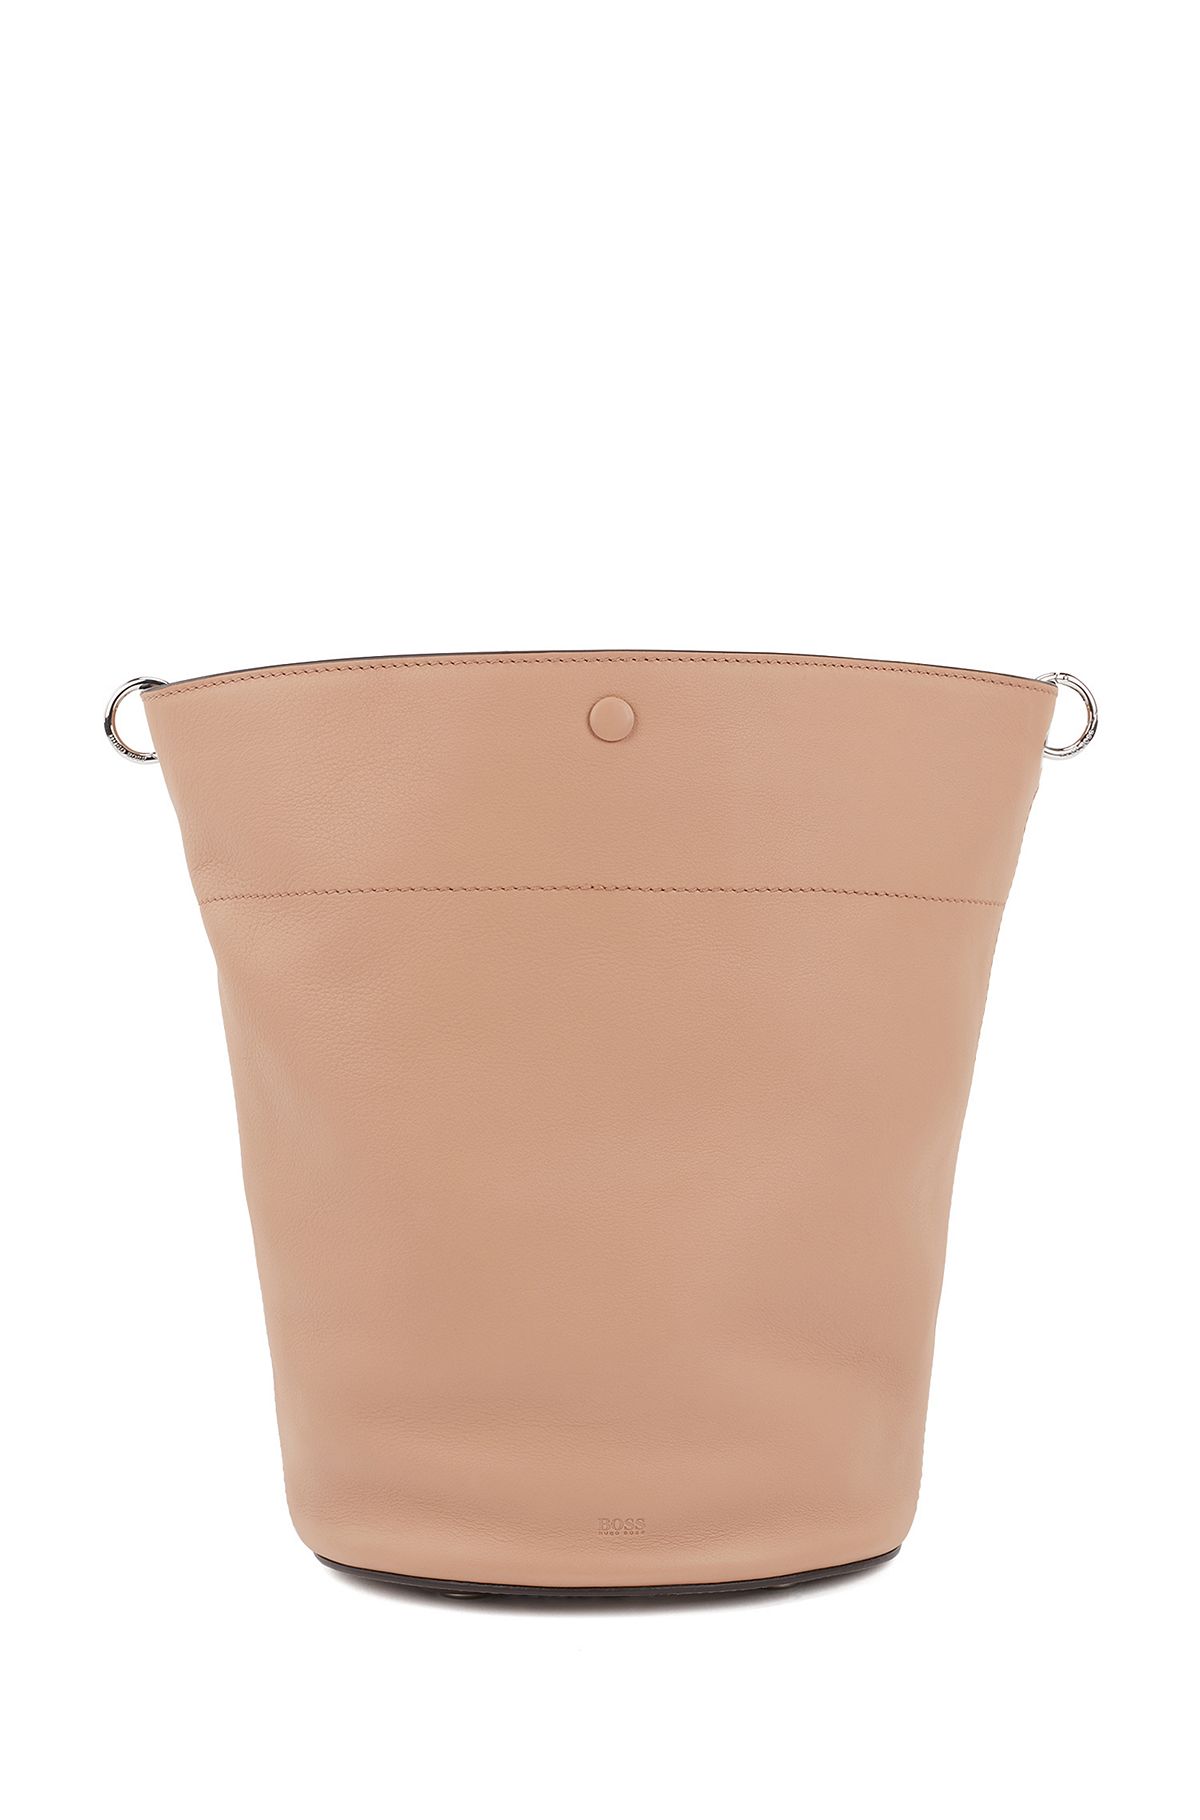 BOSS - Bucket bag in calf leather with knotted top strap